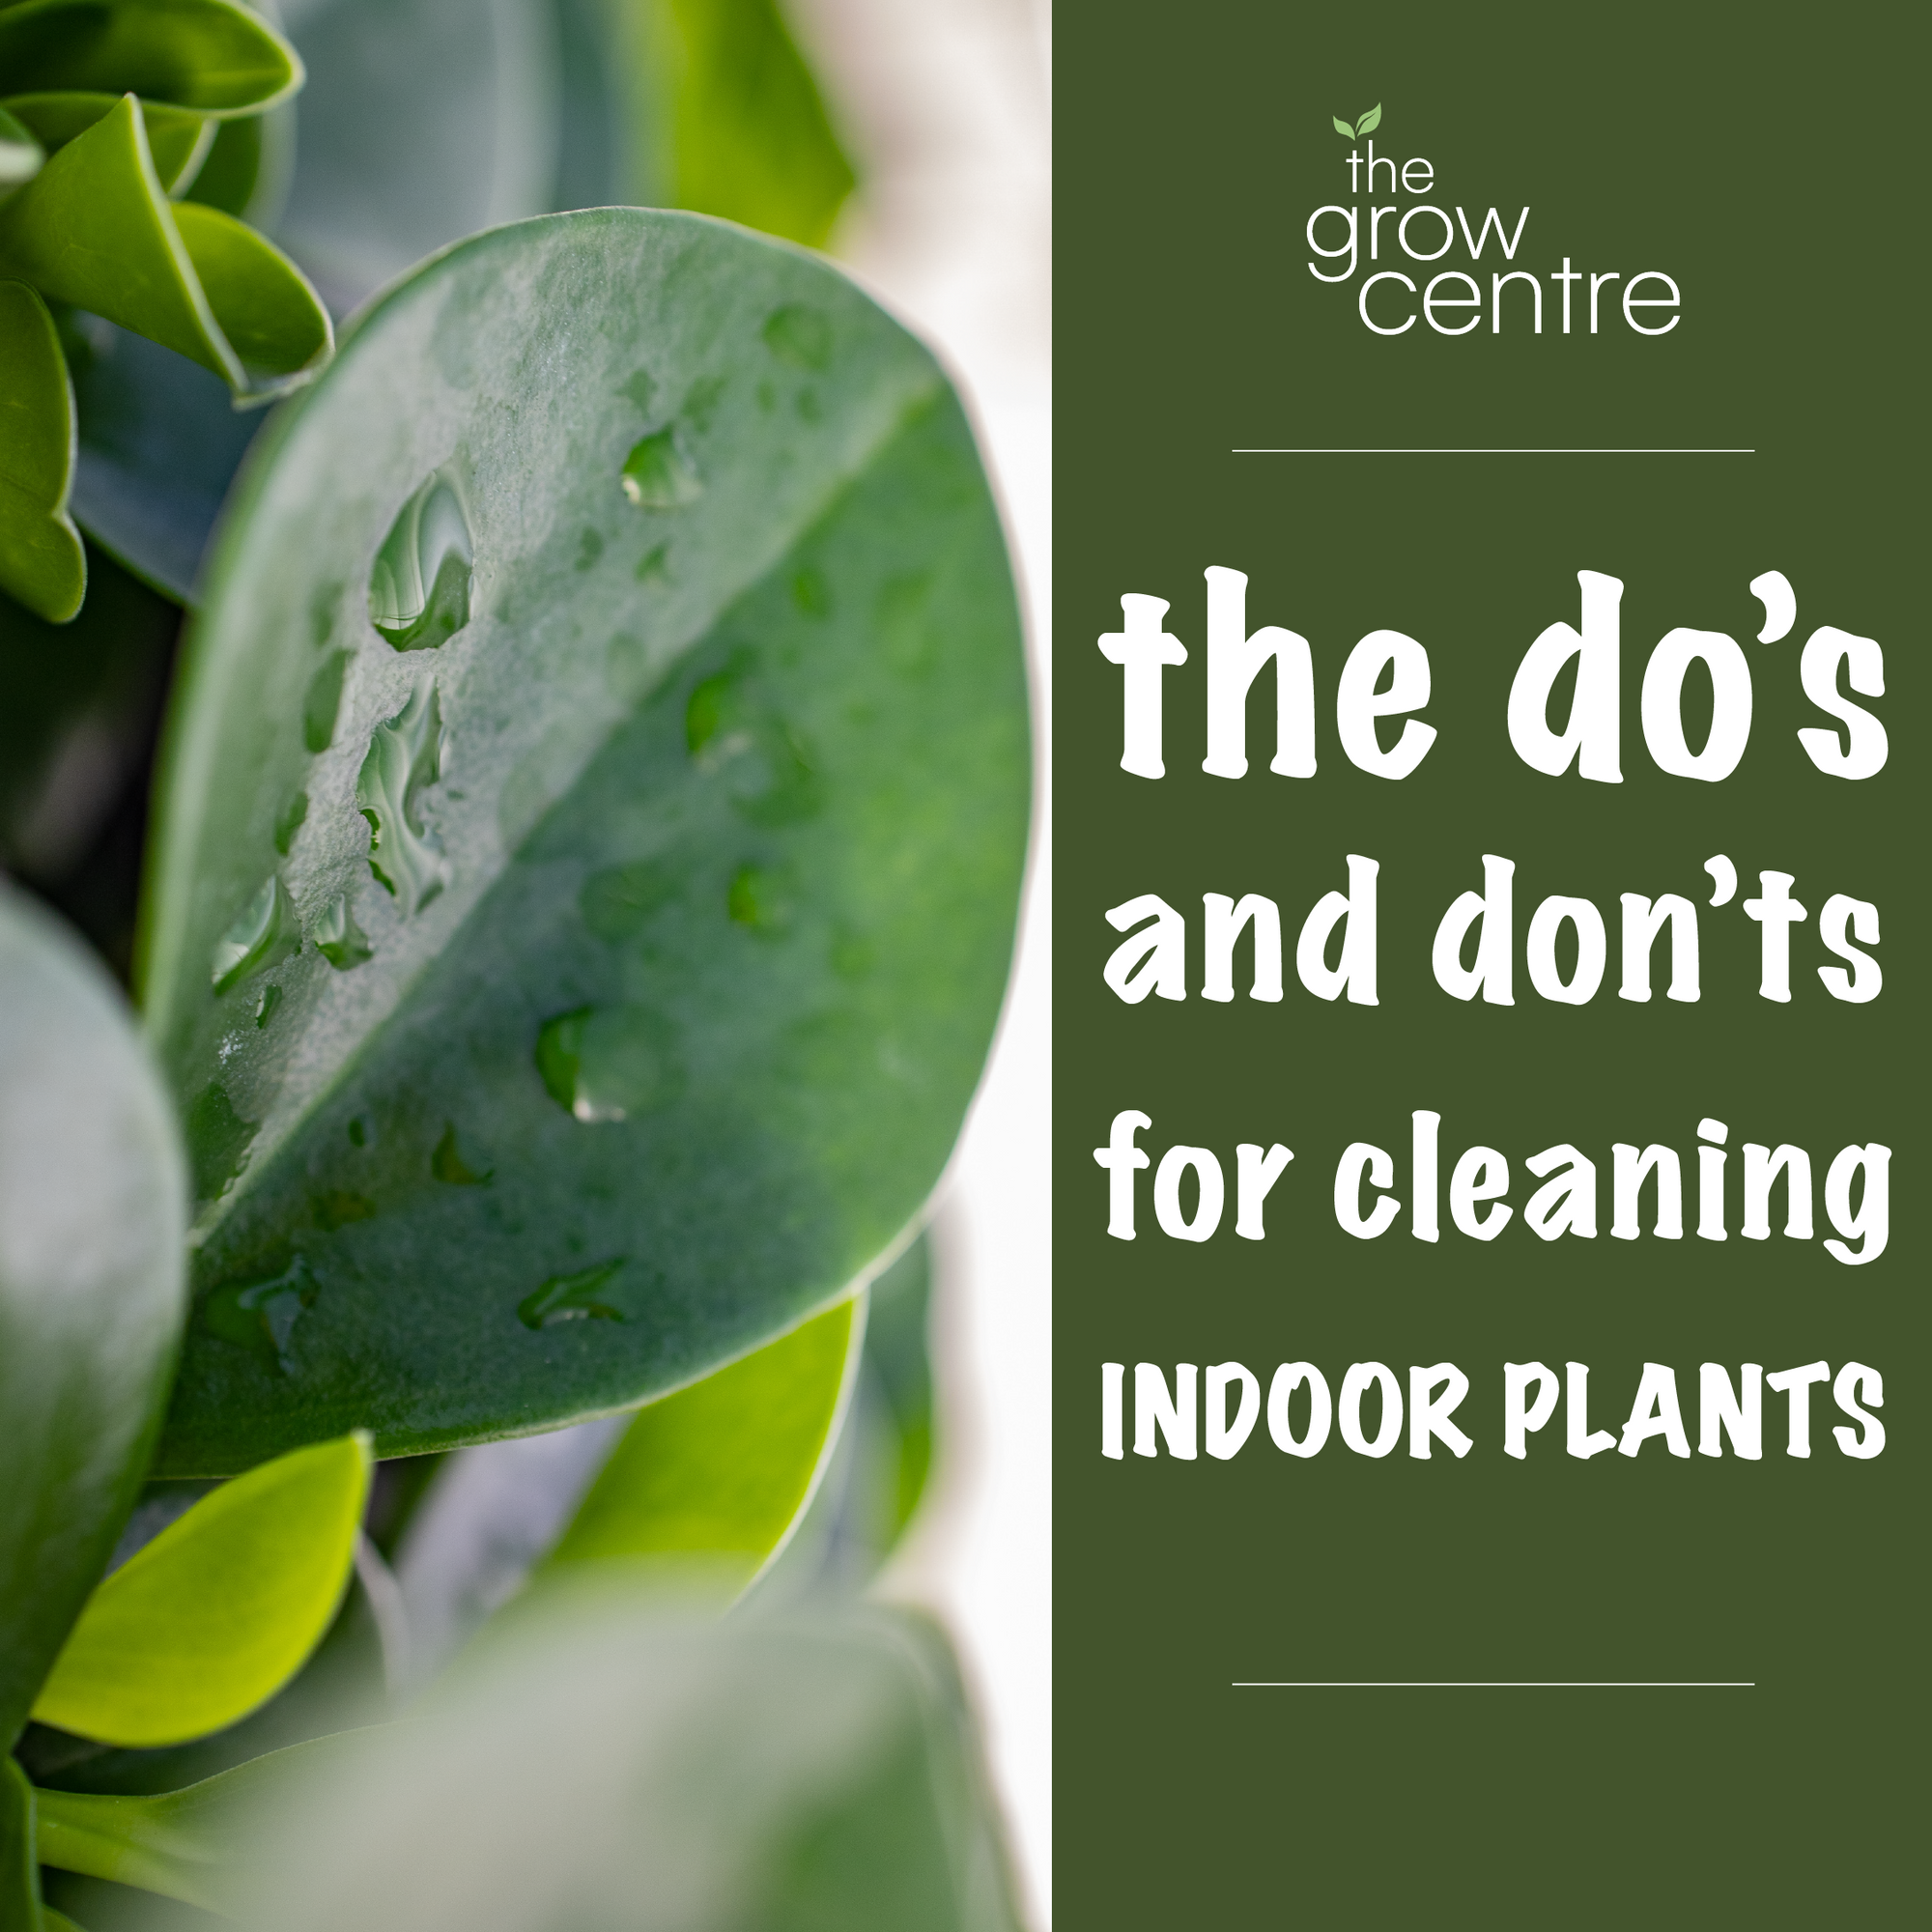 The Do's and Don'ts for cleaning plants